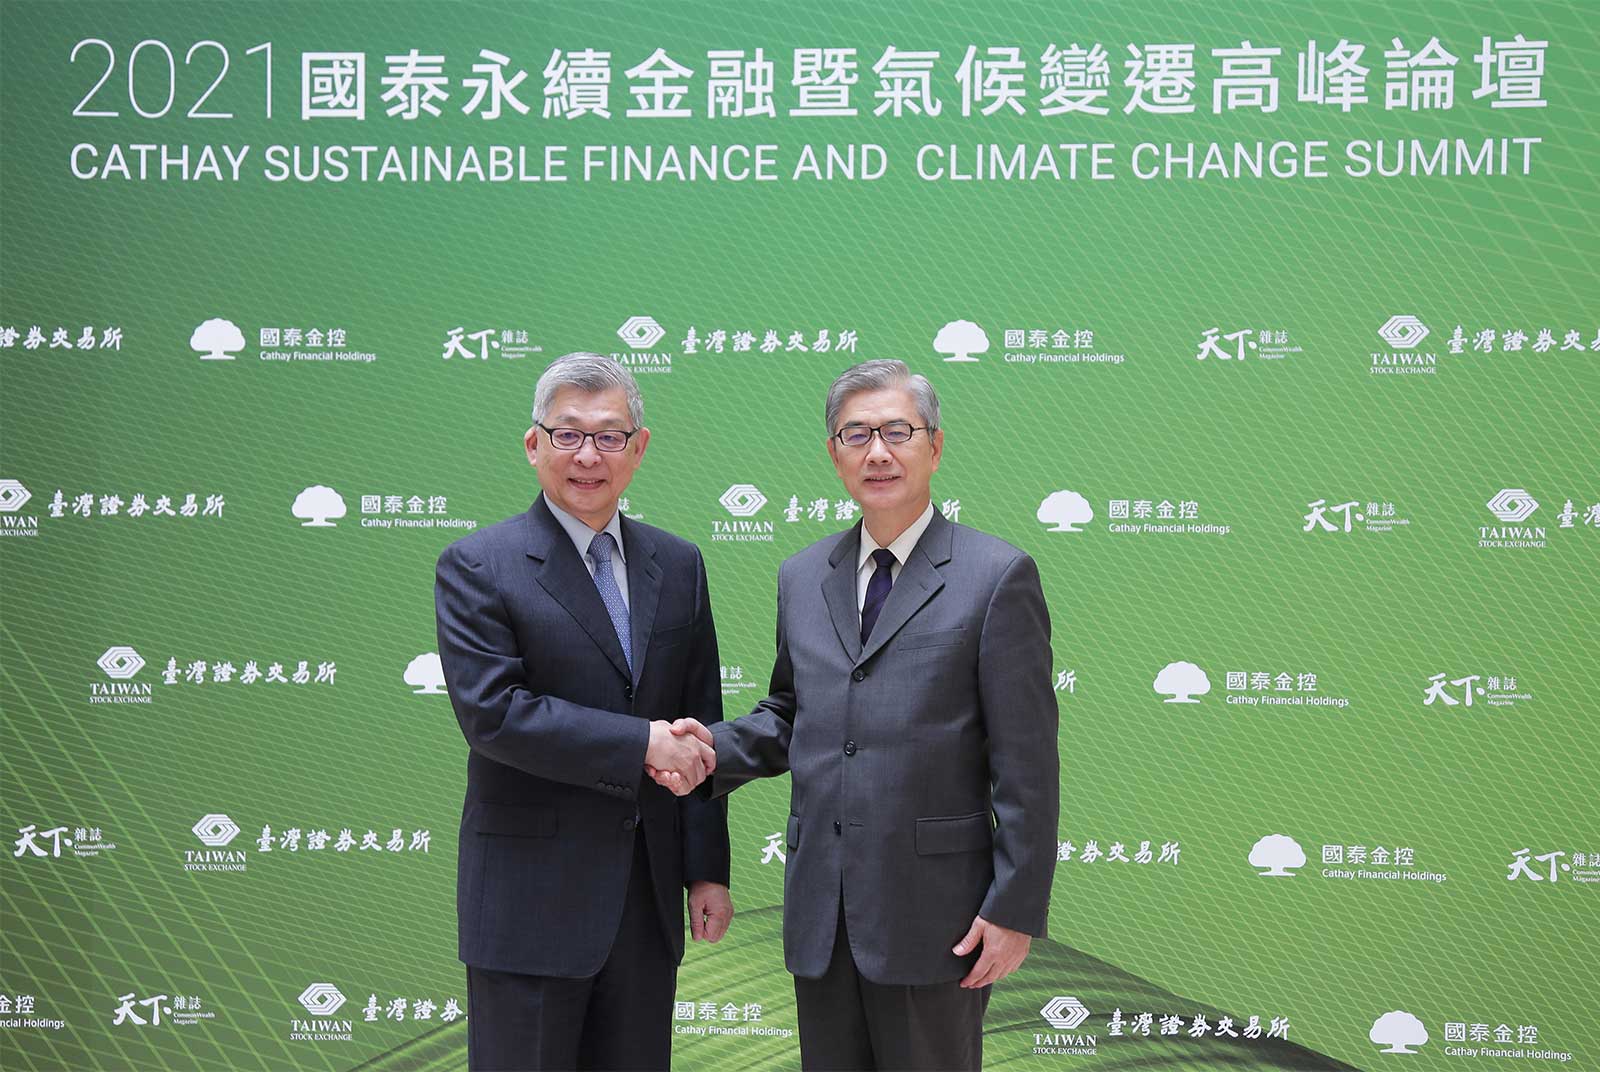 No ESG, no Taiwan：Cathay Sustainable Finance and Climate Change Summit calls for Taiwan's sustainability efforts to align with international standards